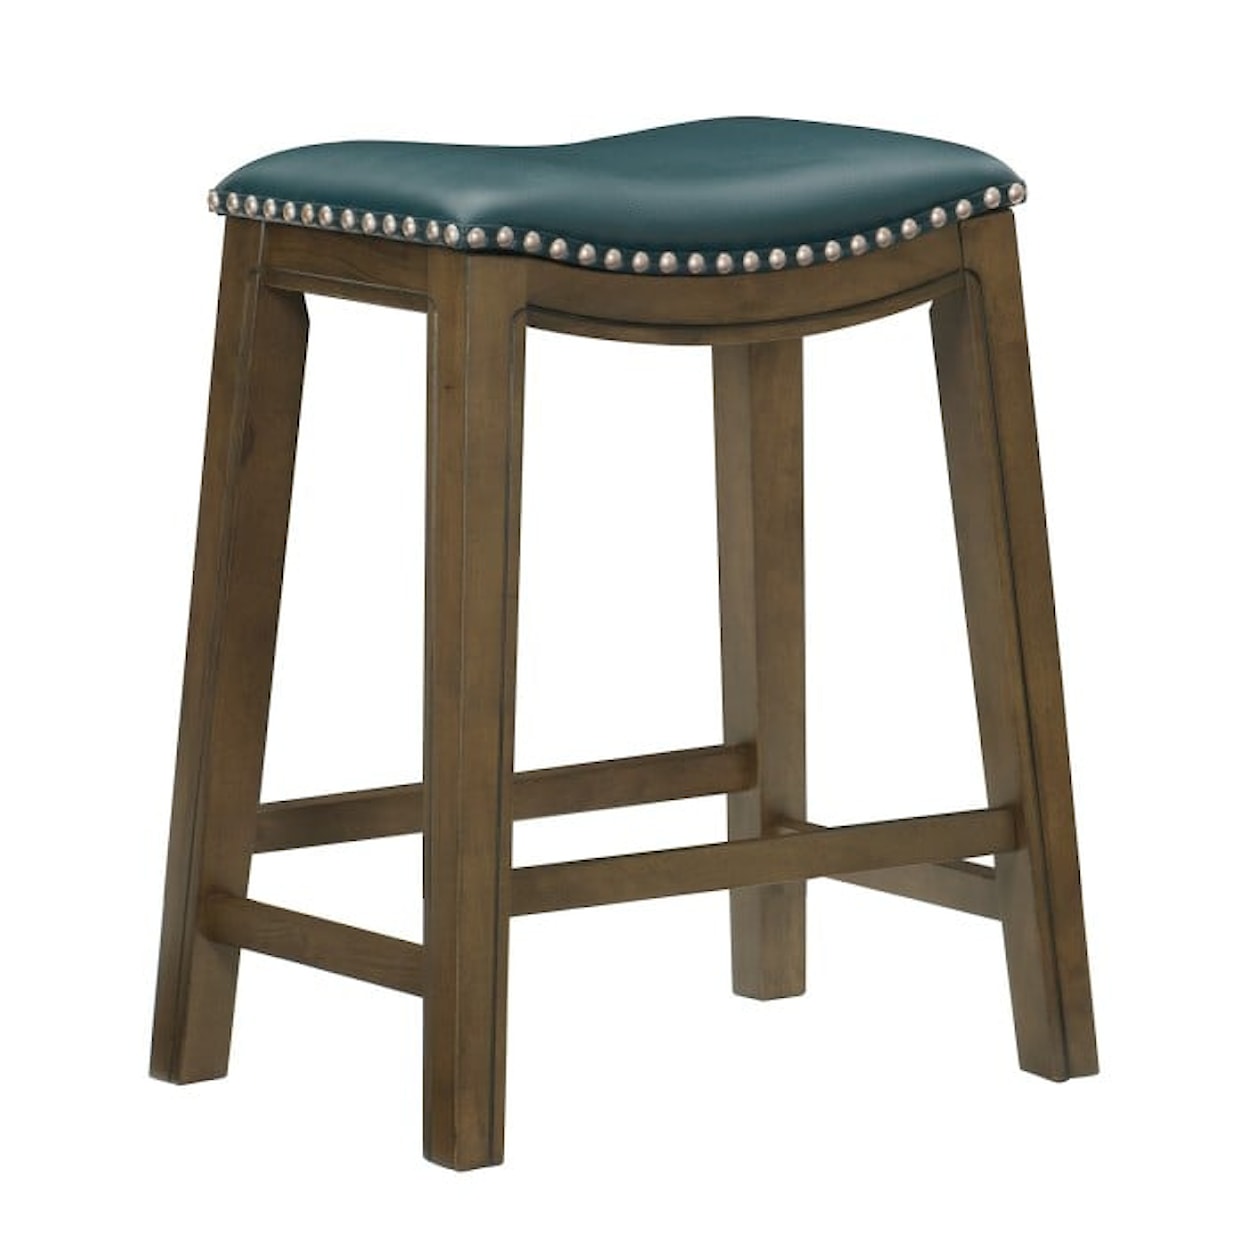 Homelegance Furniture Ordway 24 Counter Height Stool, Green